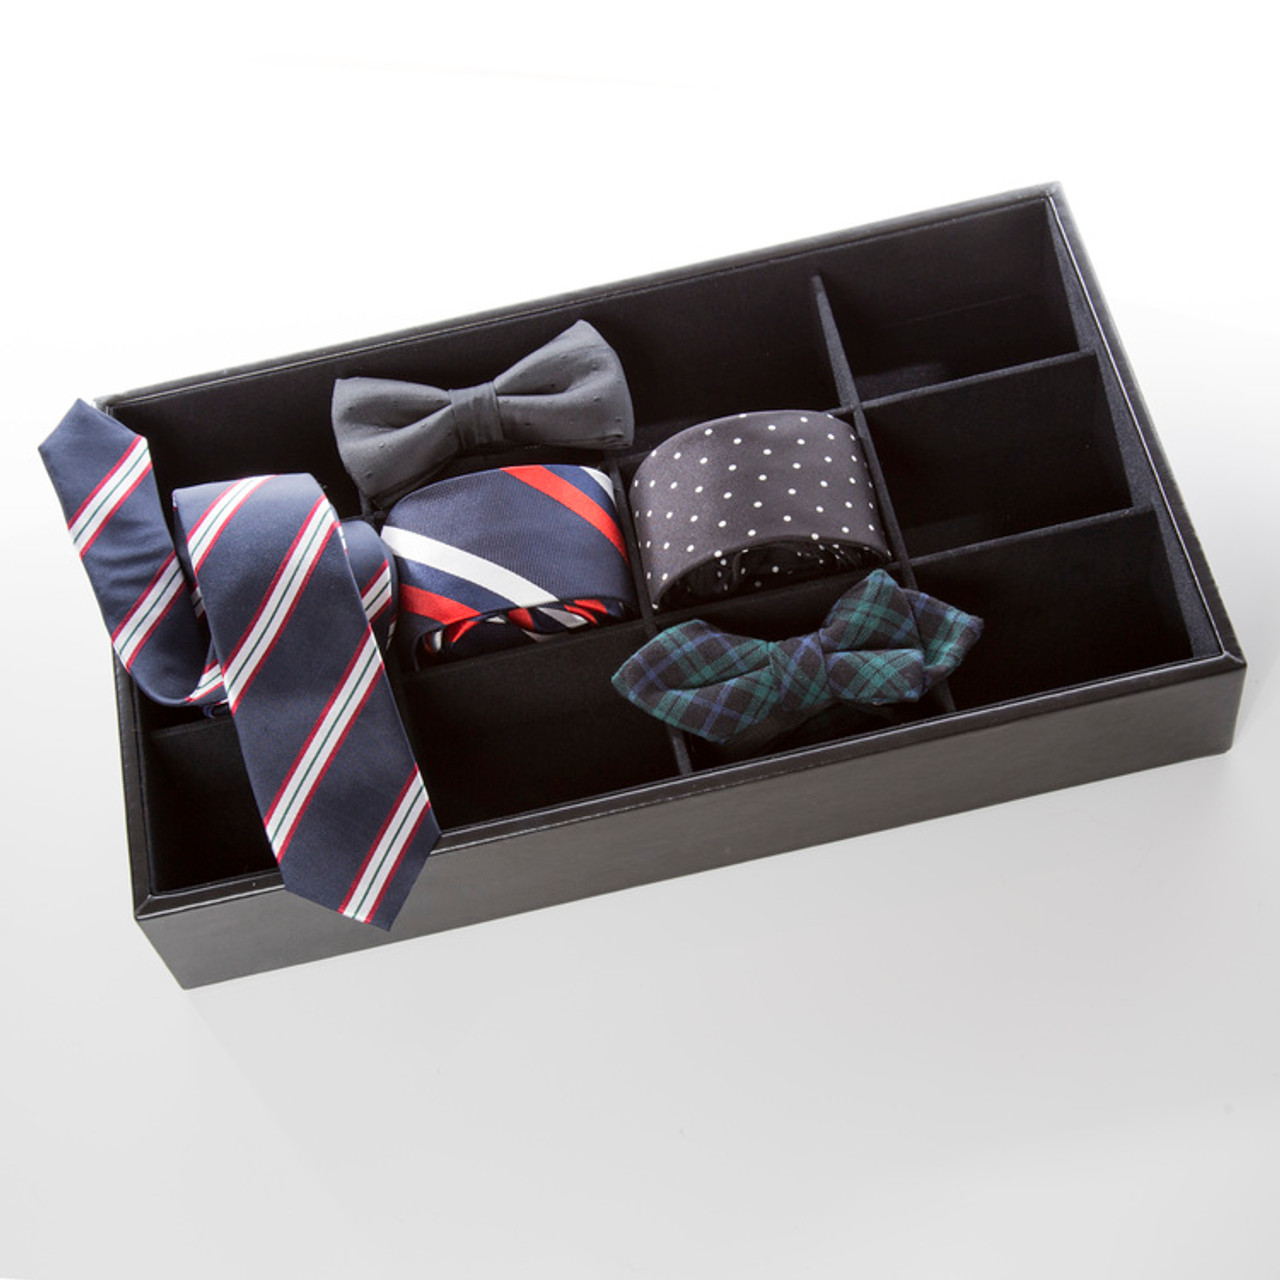 Brouk and Co Roll 'Em Up Tie Box, Black Leather